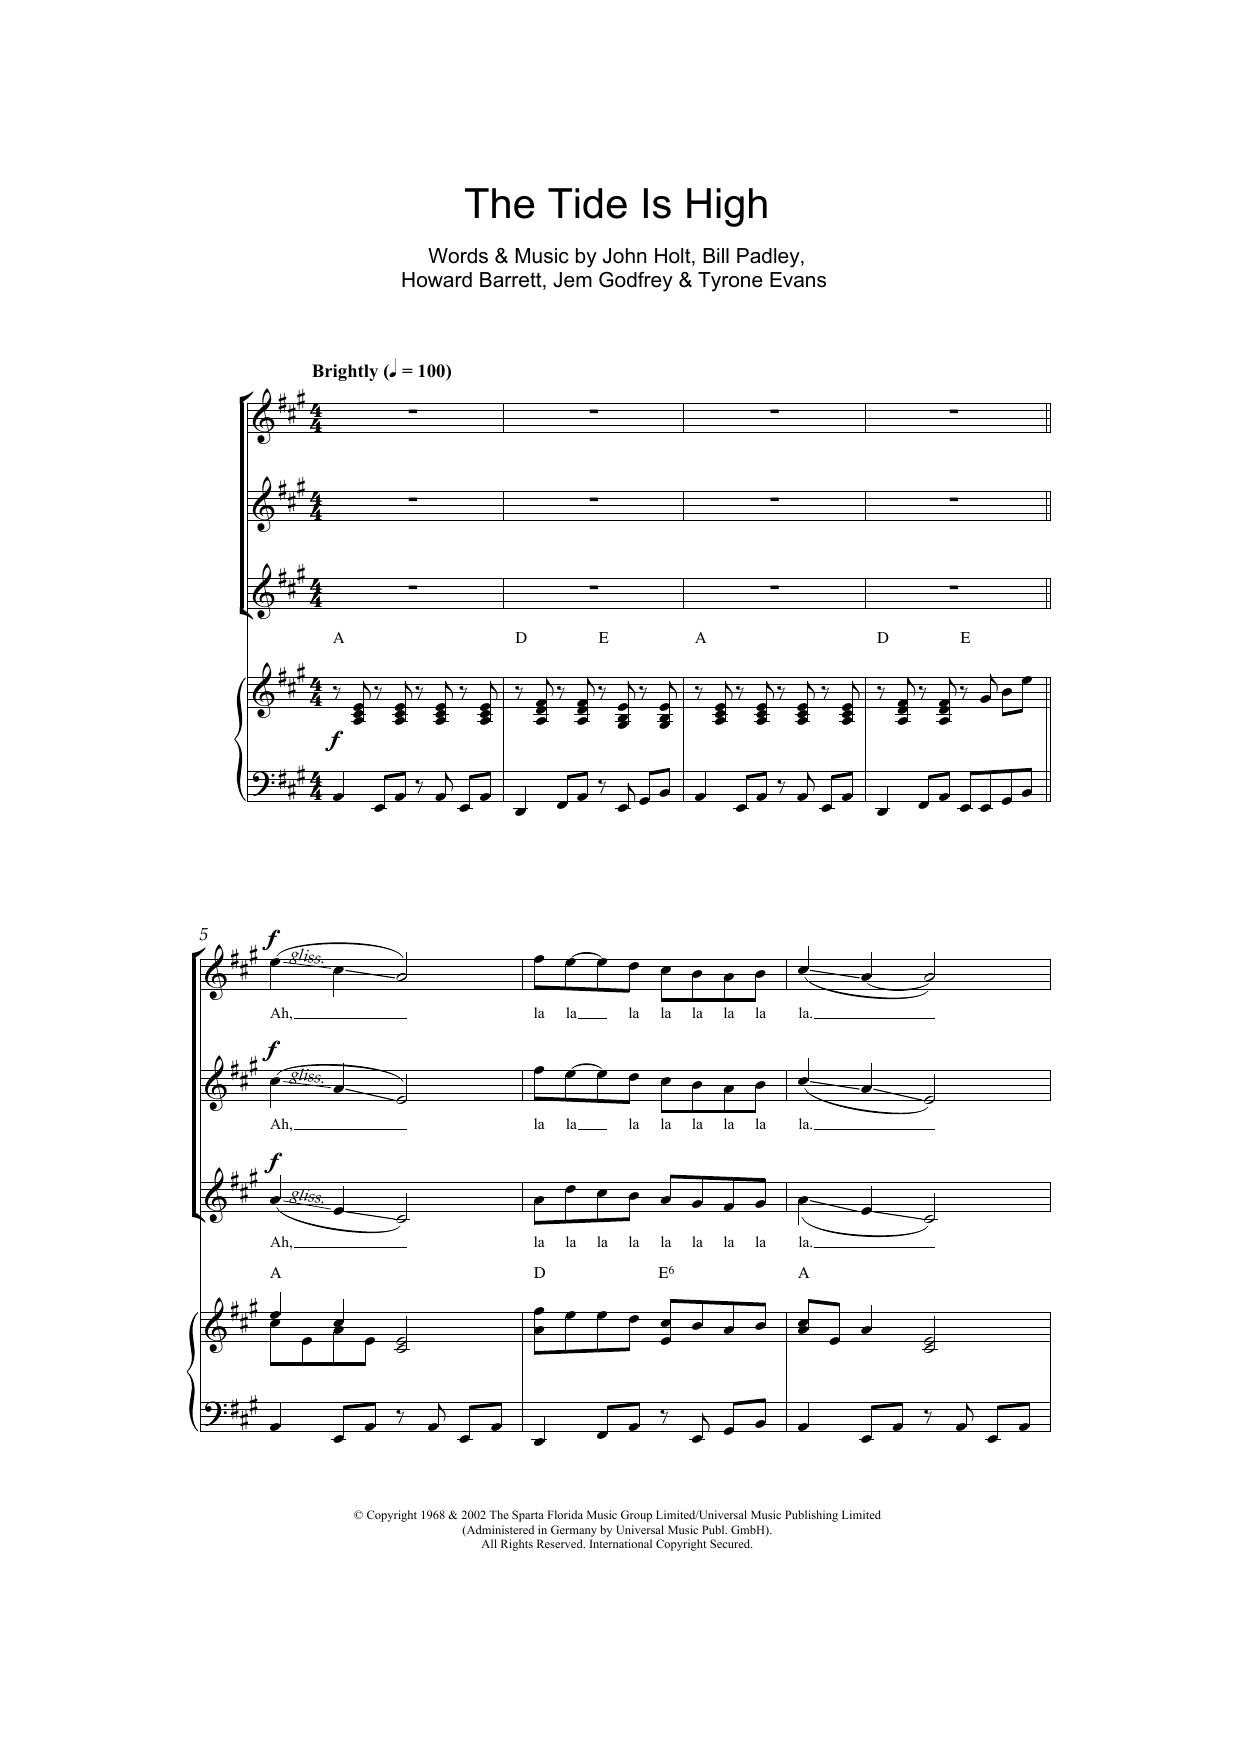 Download Blondie The Tide Is High (Get The Feeling) Sheet Music